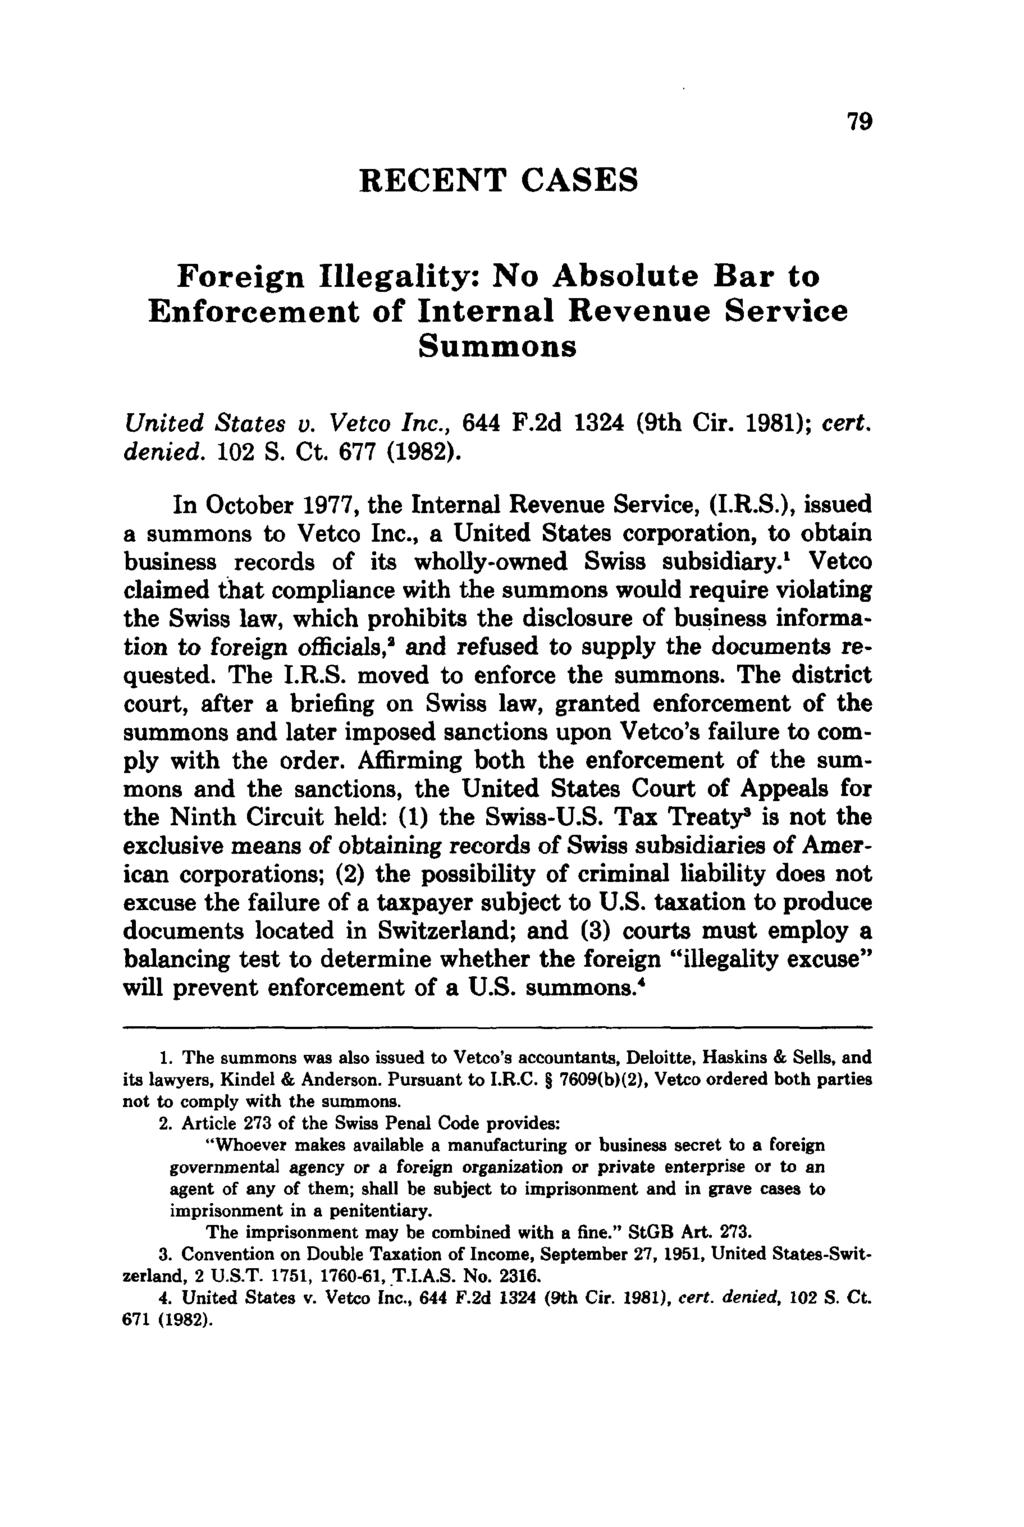 RECENT CASES Foreign Illegality: No Absolute Bar to Enforcement of Internal Revenue Service Summons United States v. Vetco Inc., 644 F.2d 1324 (9th Cir. 1981); cert. denied. 102 S. Ct. 677 (1982).